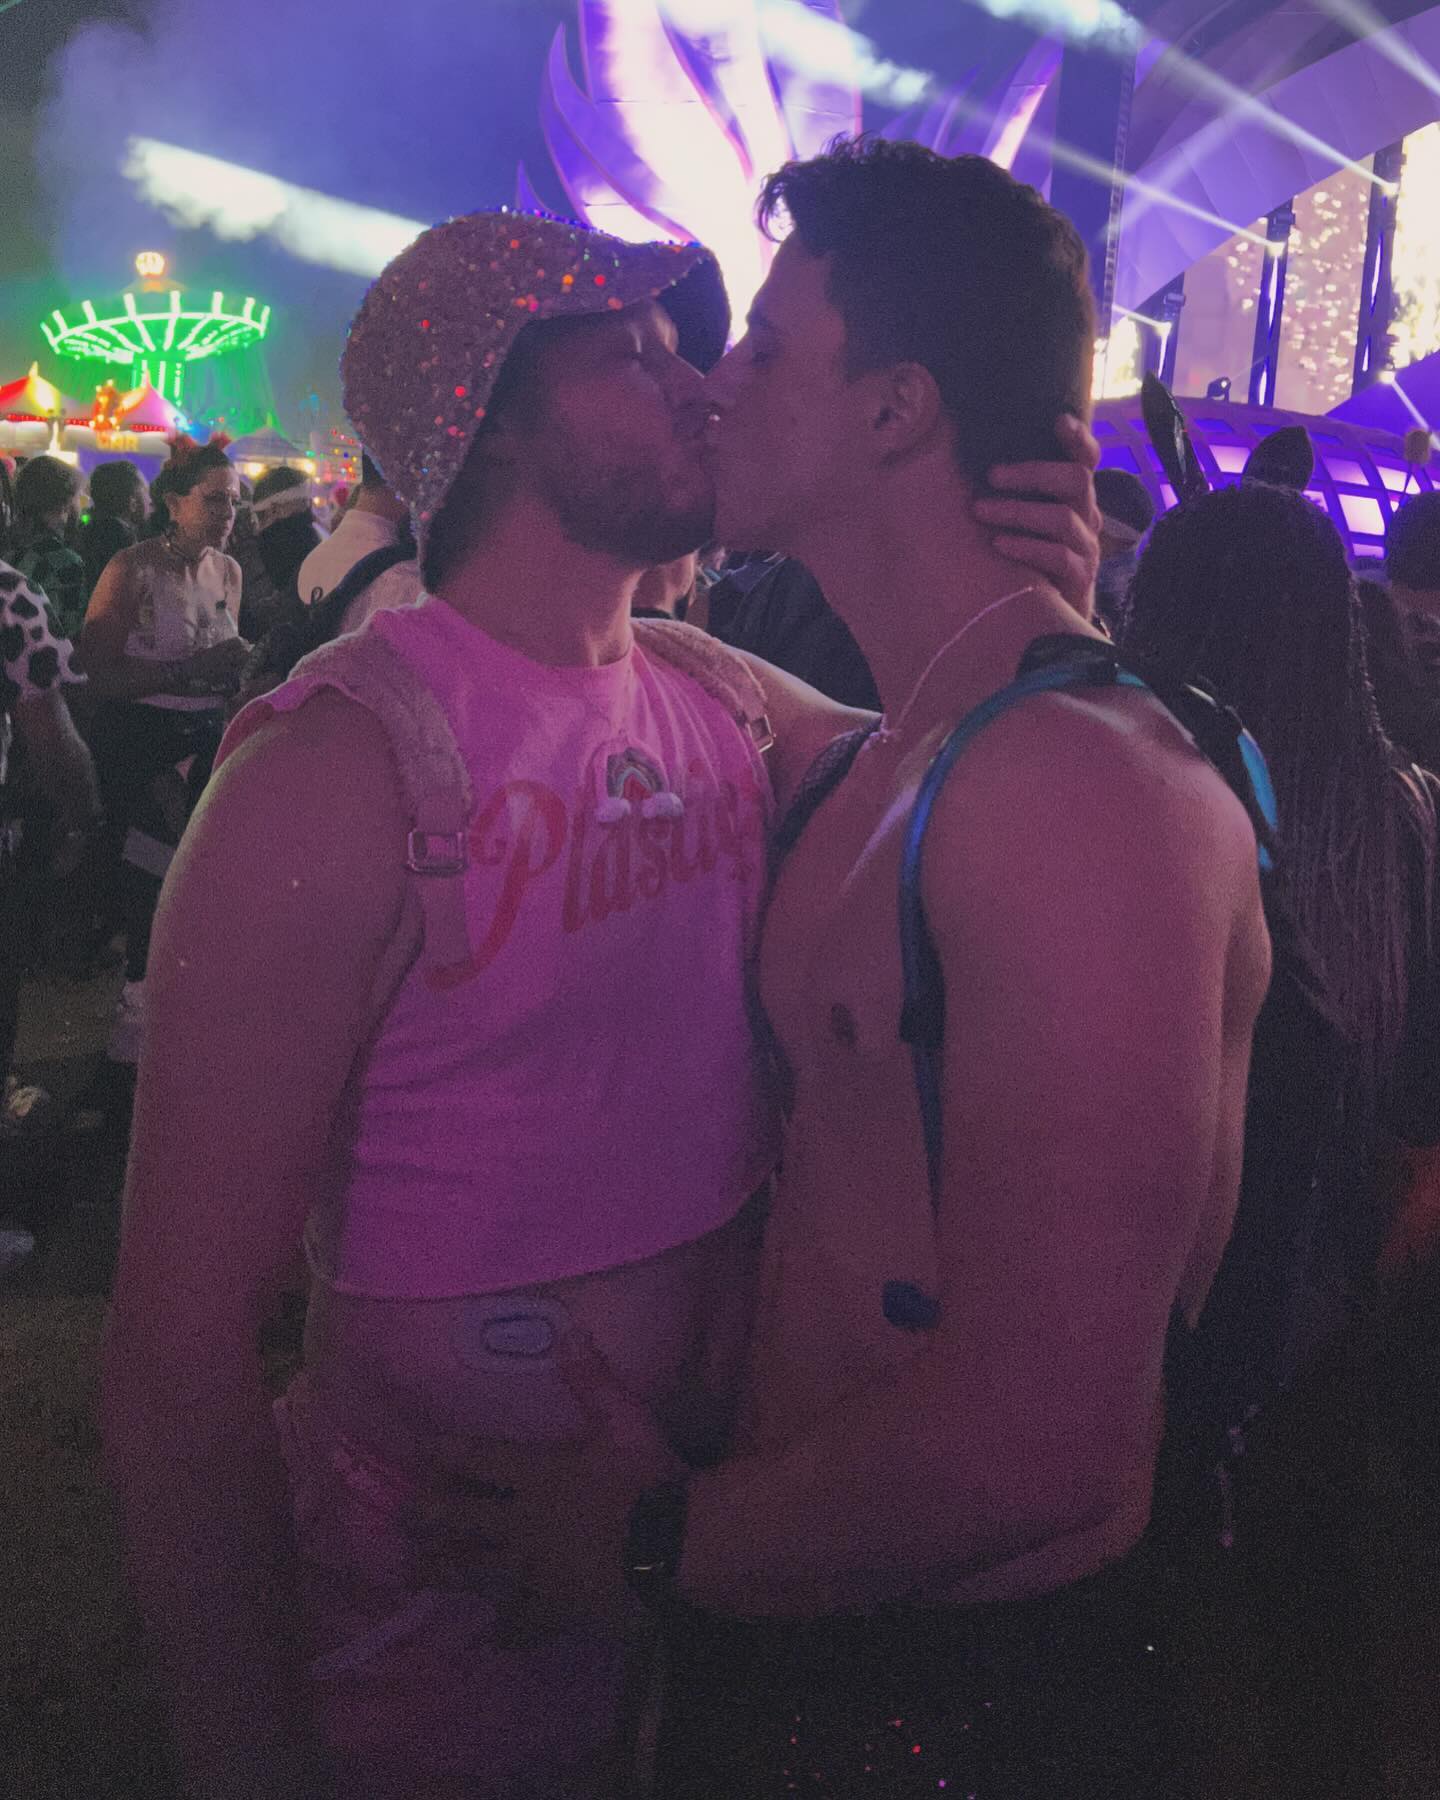 ✌🏻 years in and I’d honestly give it five stars ! Definitely recommend dating @itswyattmoore_ ! But also don’t, bc he’s mine 🥰 Happy anniversary Wyatt! ❤️

#lgbt #pride #boyfriends #couple #gaycouplegoals #raveboyfriends #anniversavy